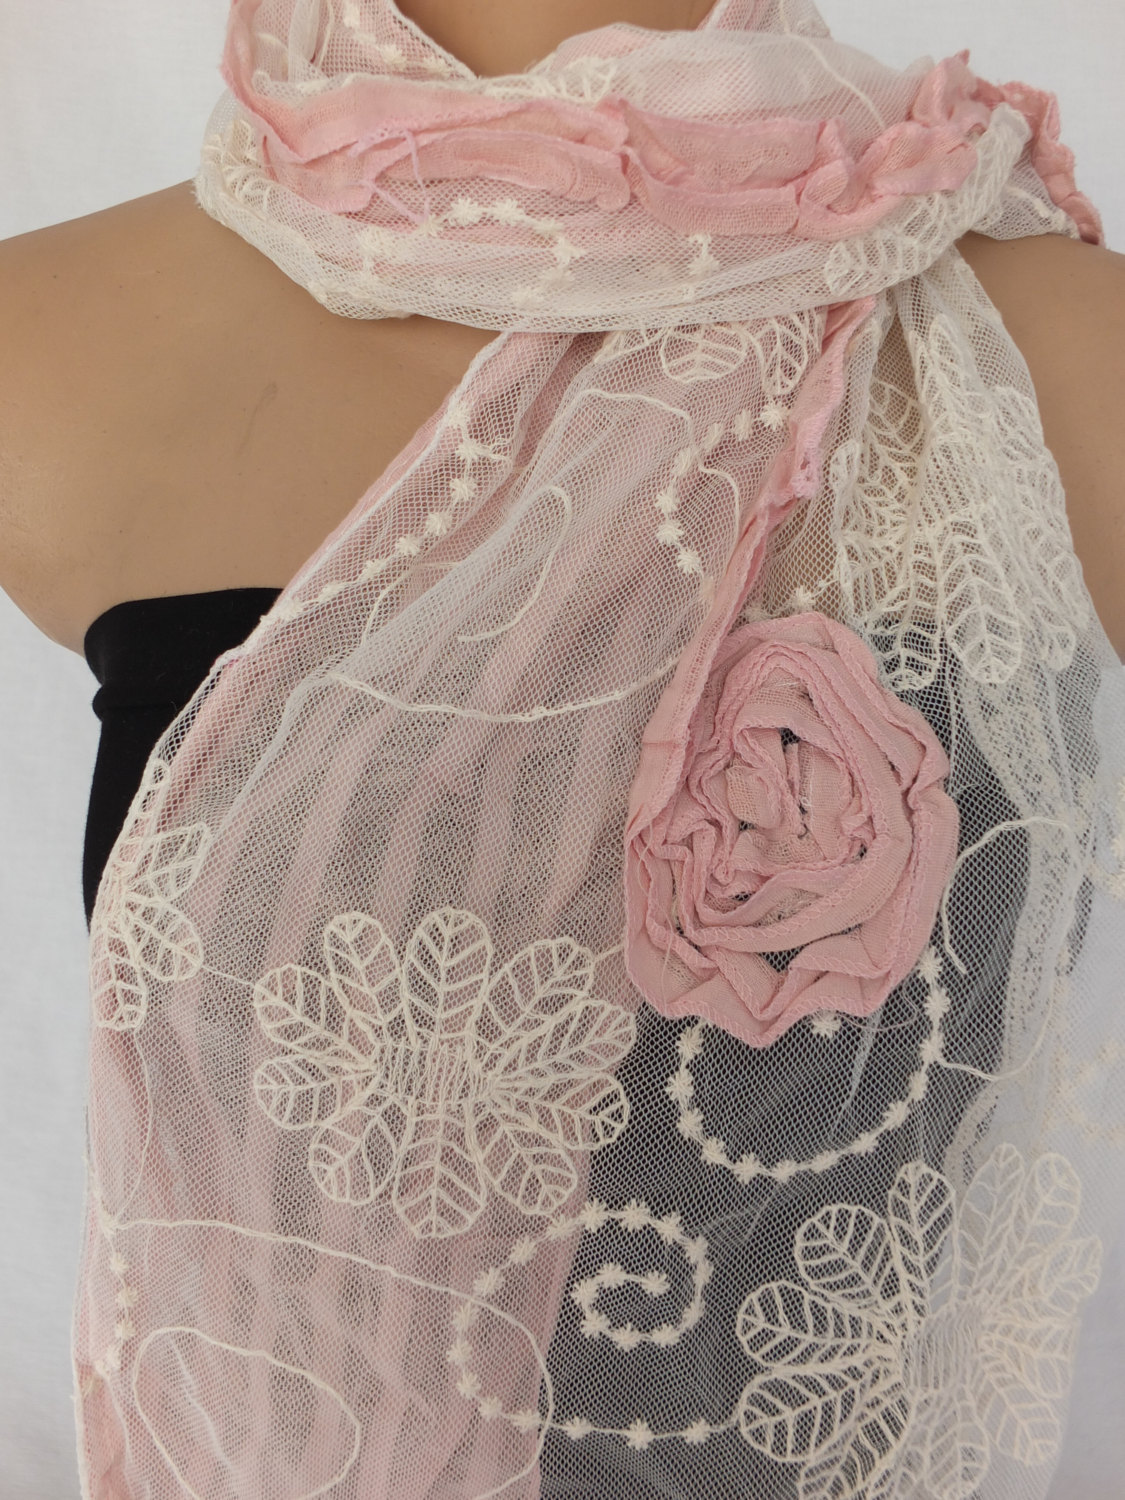 Embroidery Tulle And Cotton Scarf, Pale Pink And Cream Scarf, Womans Fashipn Scarf, Long Scarf Shawl, Gift For Her